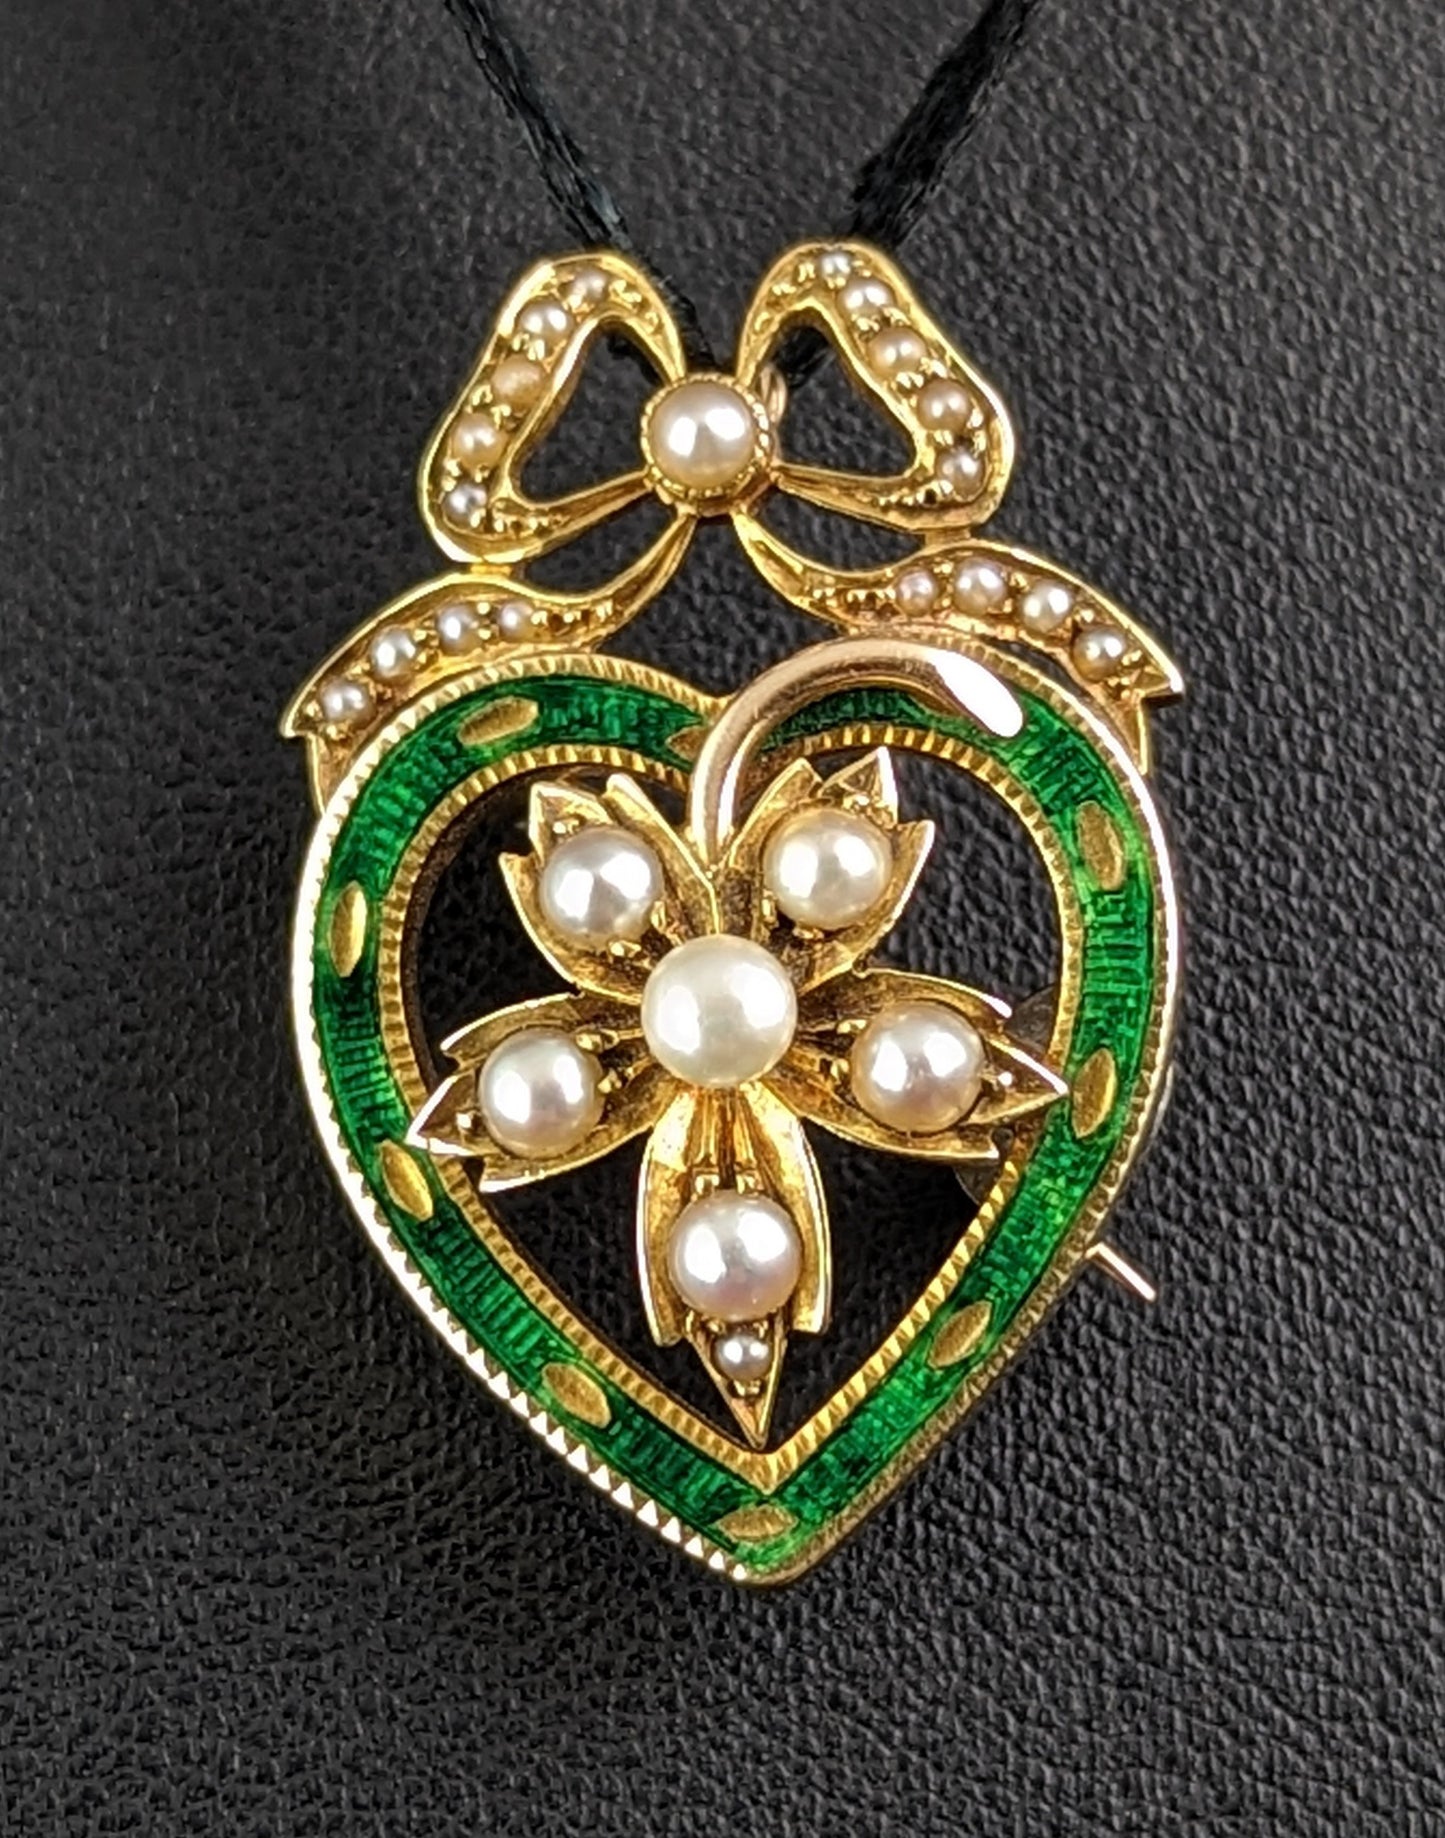 Antique Green Enamel and Pearl Heart pendant, 9ct gold